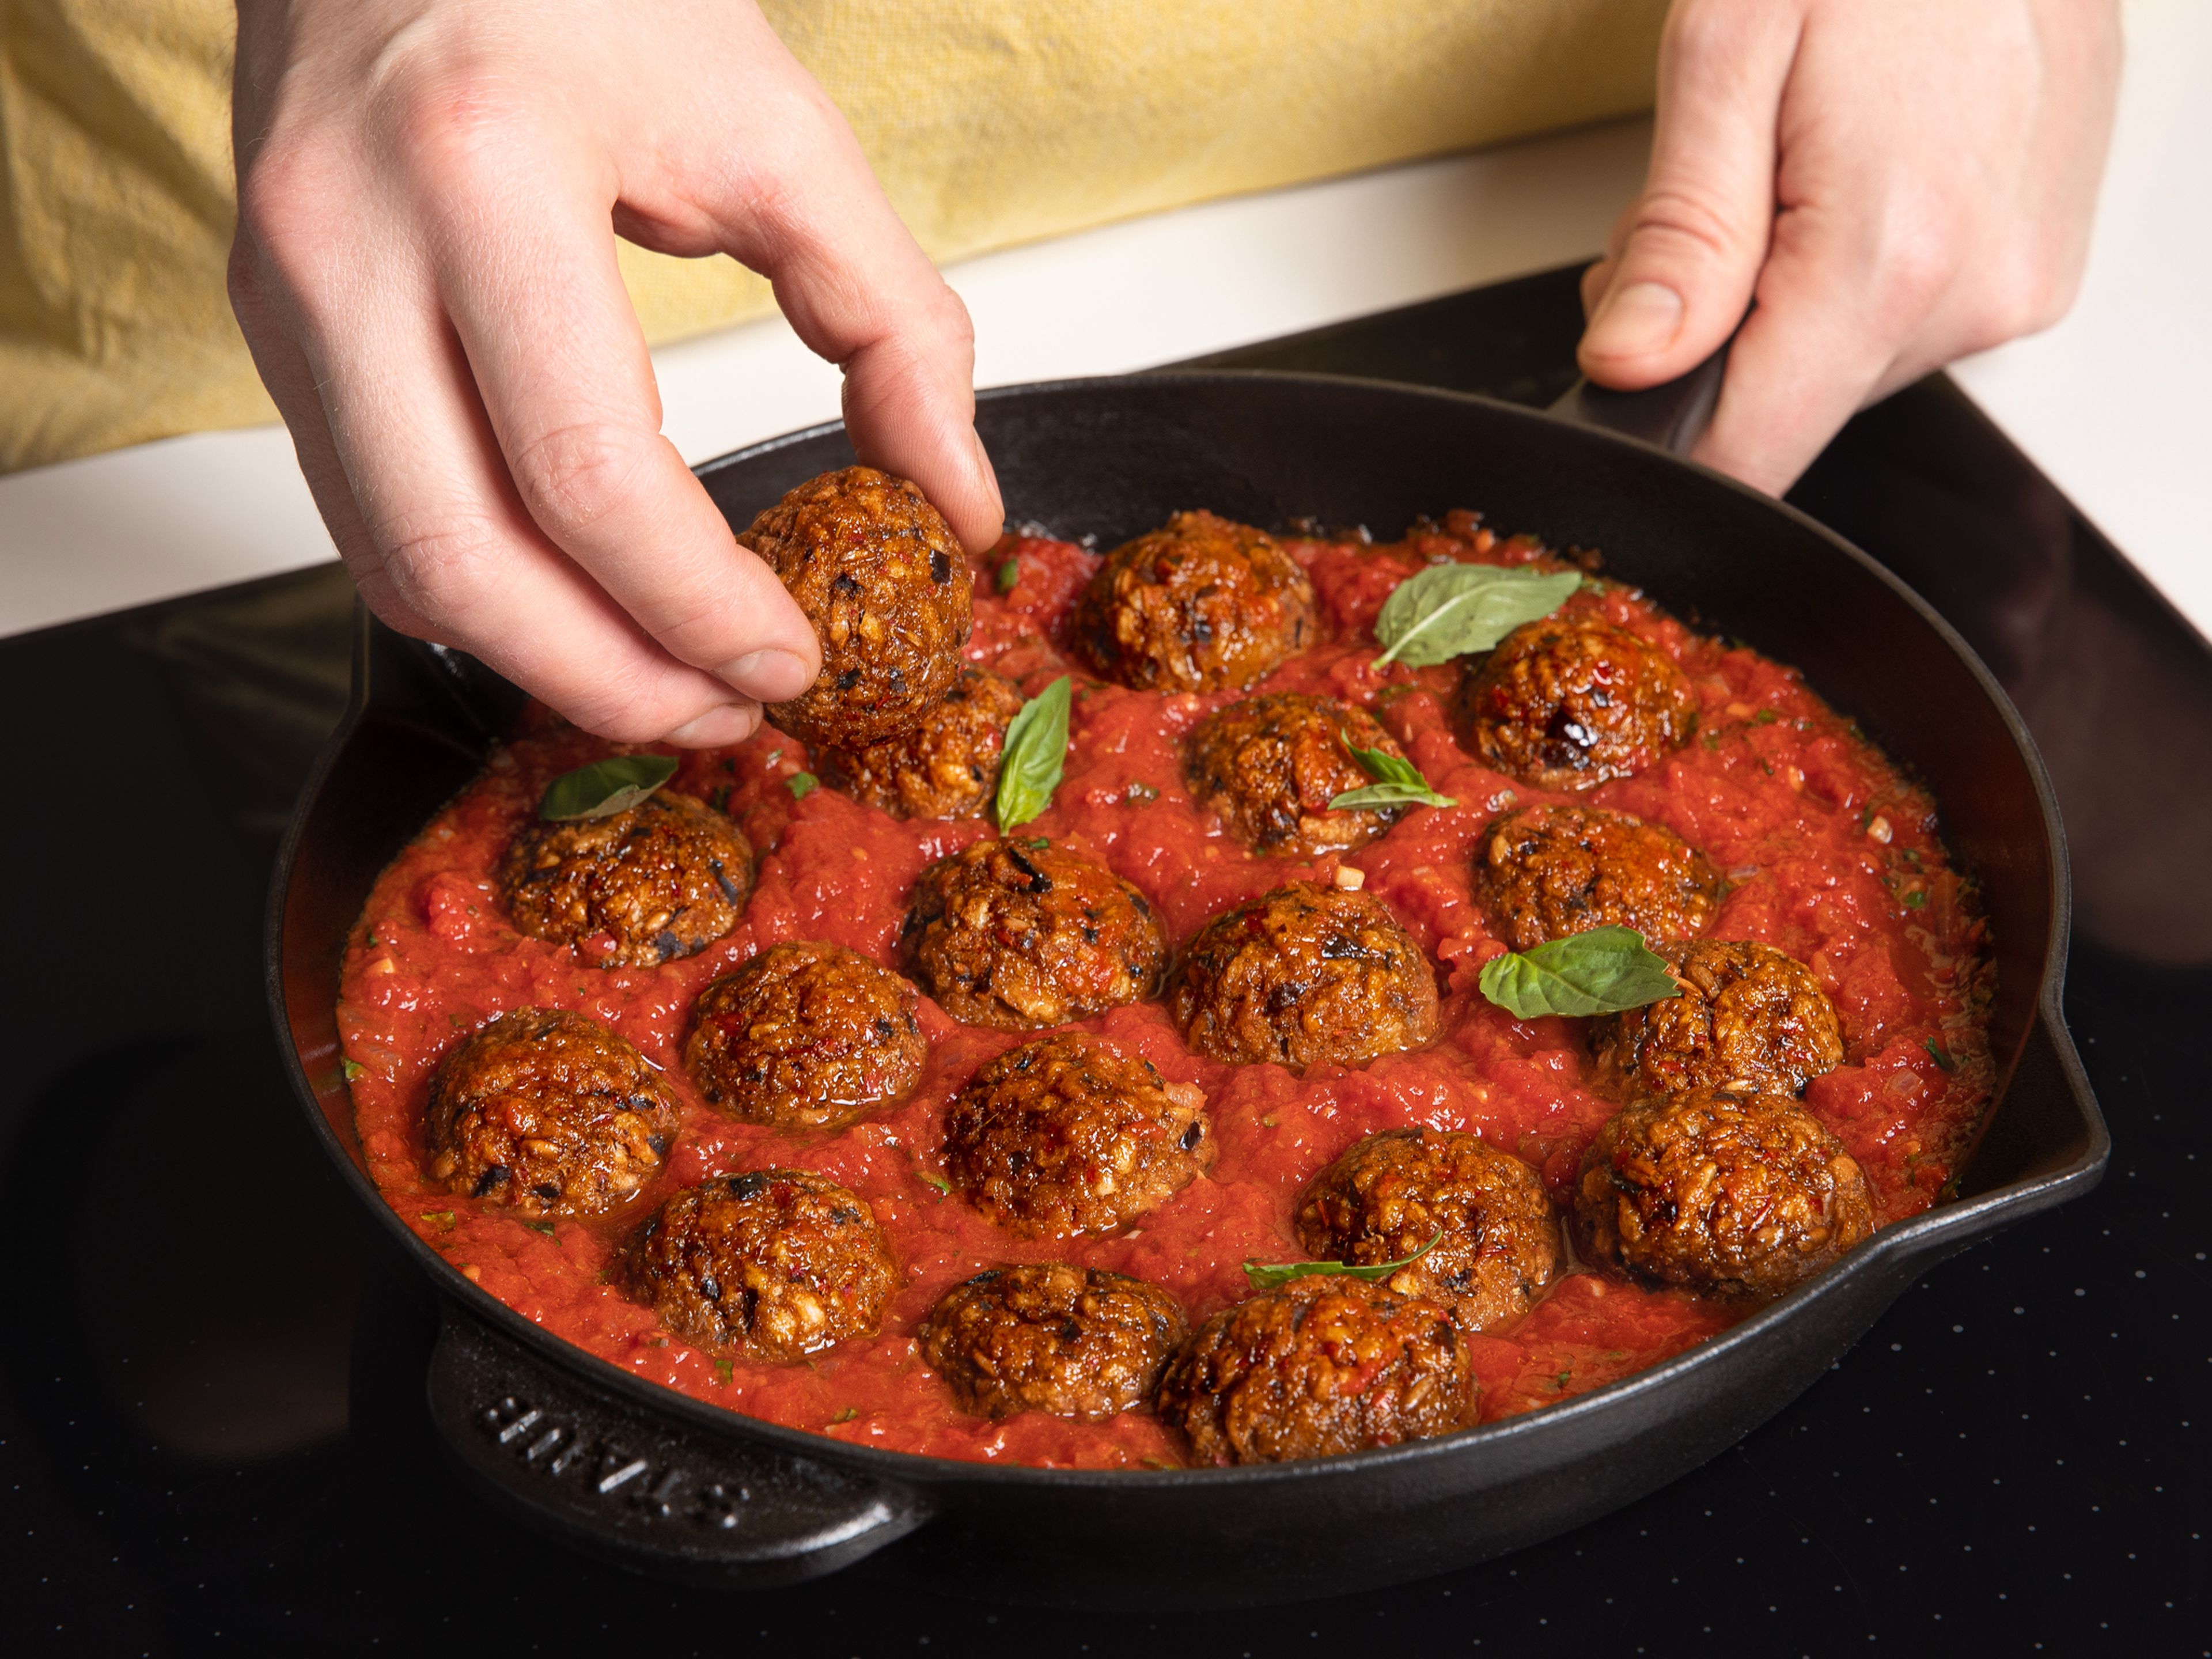 Bake at 200°C/400°F for approx. 20 min. or until lightly browned and crisp on the outside. Add half of the basil leaves to the tomato sauce, then add the meatballs and lightly toss. Serve with remaining basil and enjoy!